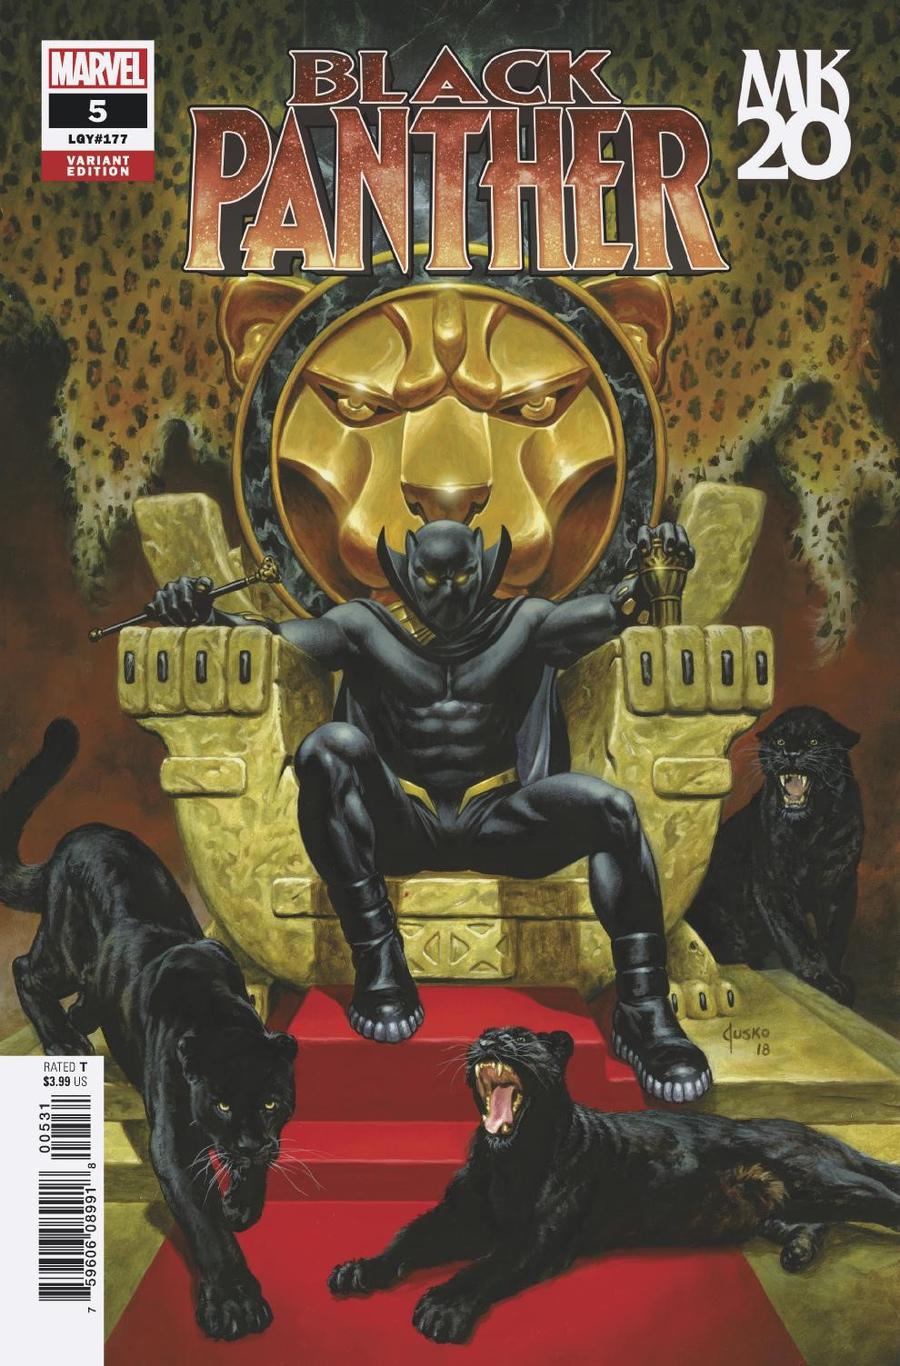 Black Panther Vol 7 #5 Cover C Variant Joe Jusko MKXX Cover